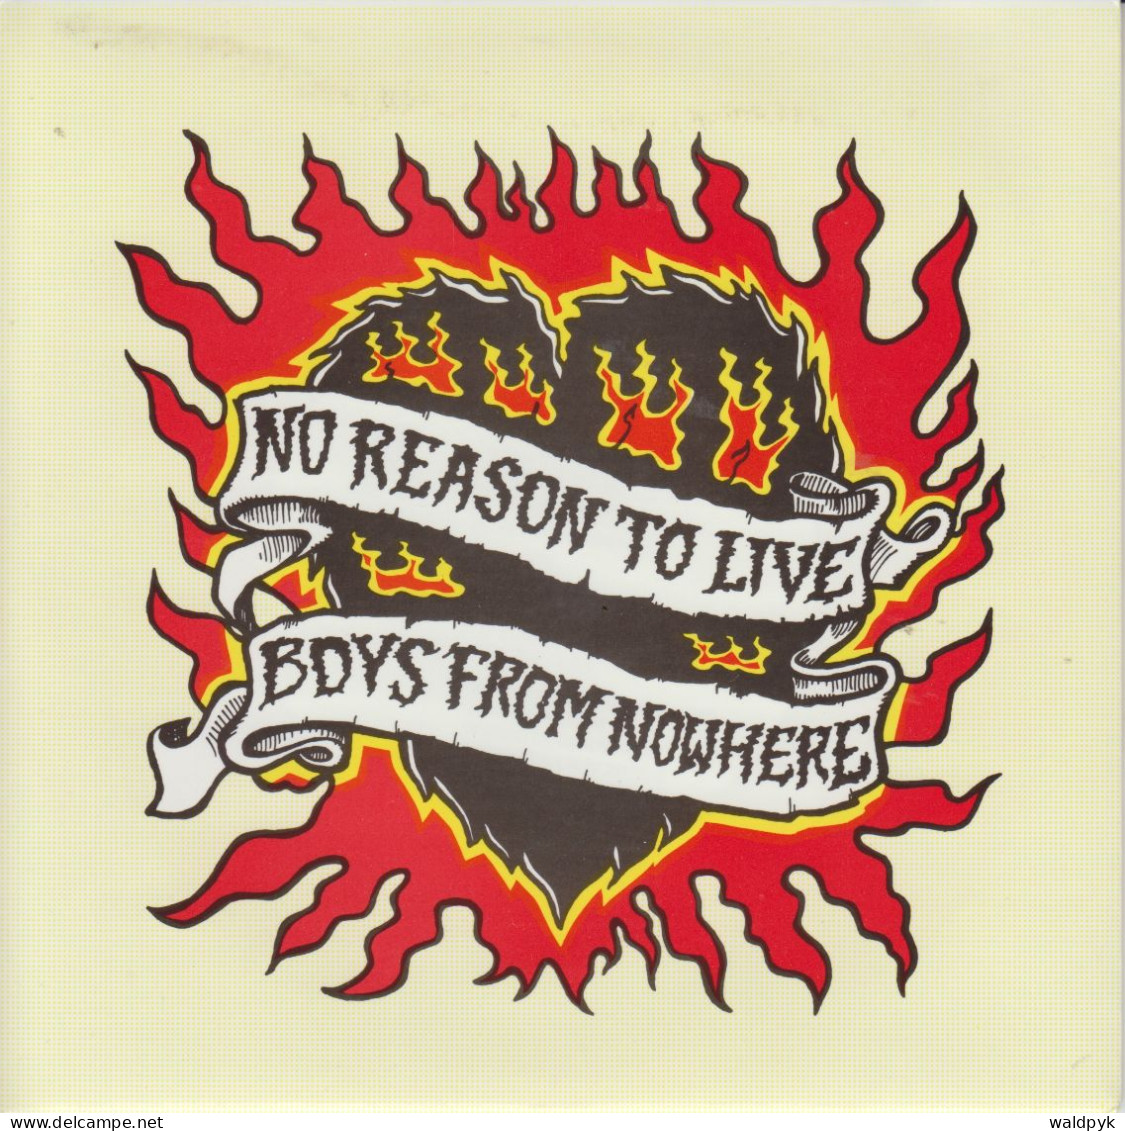 THE BOYS FROM NOWHERE - No Reason To Live - Andere - Engelstalig